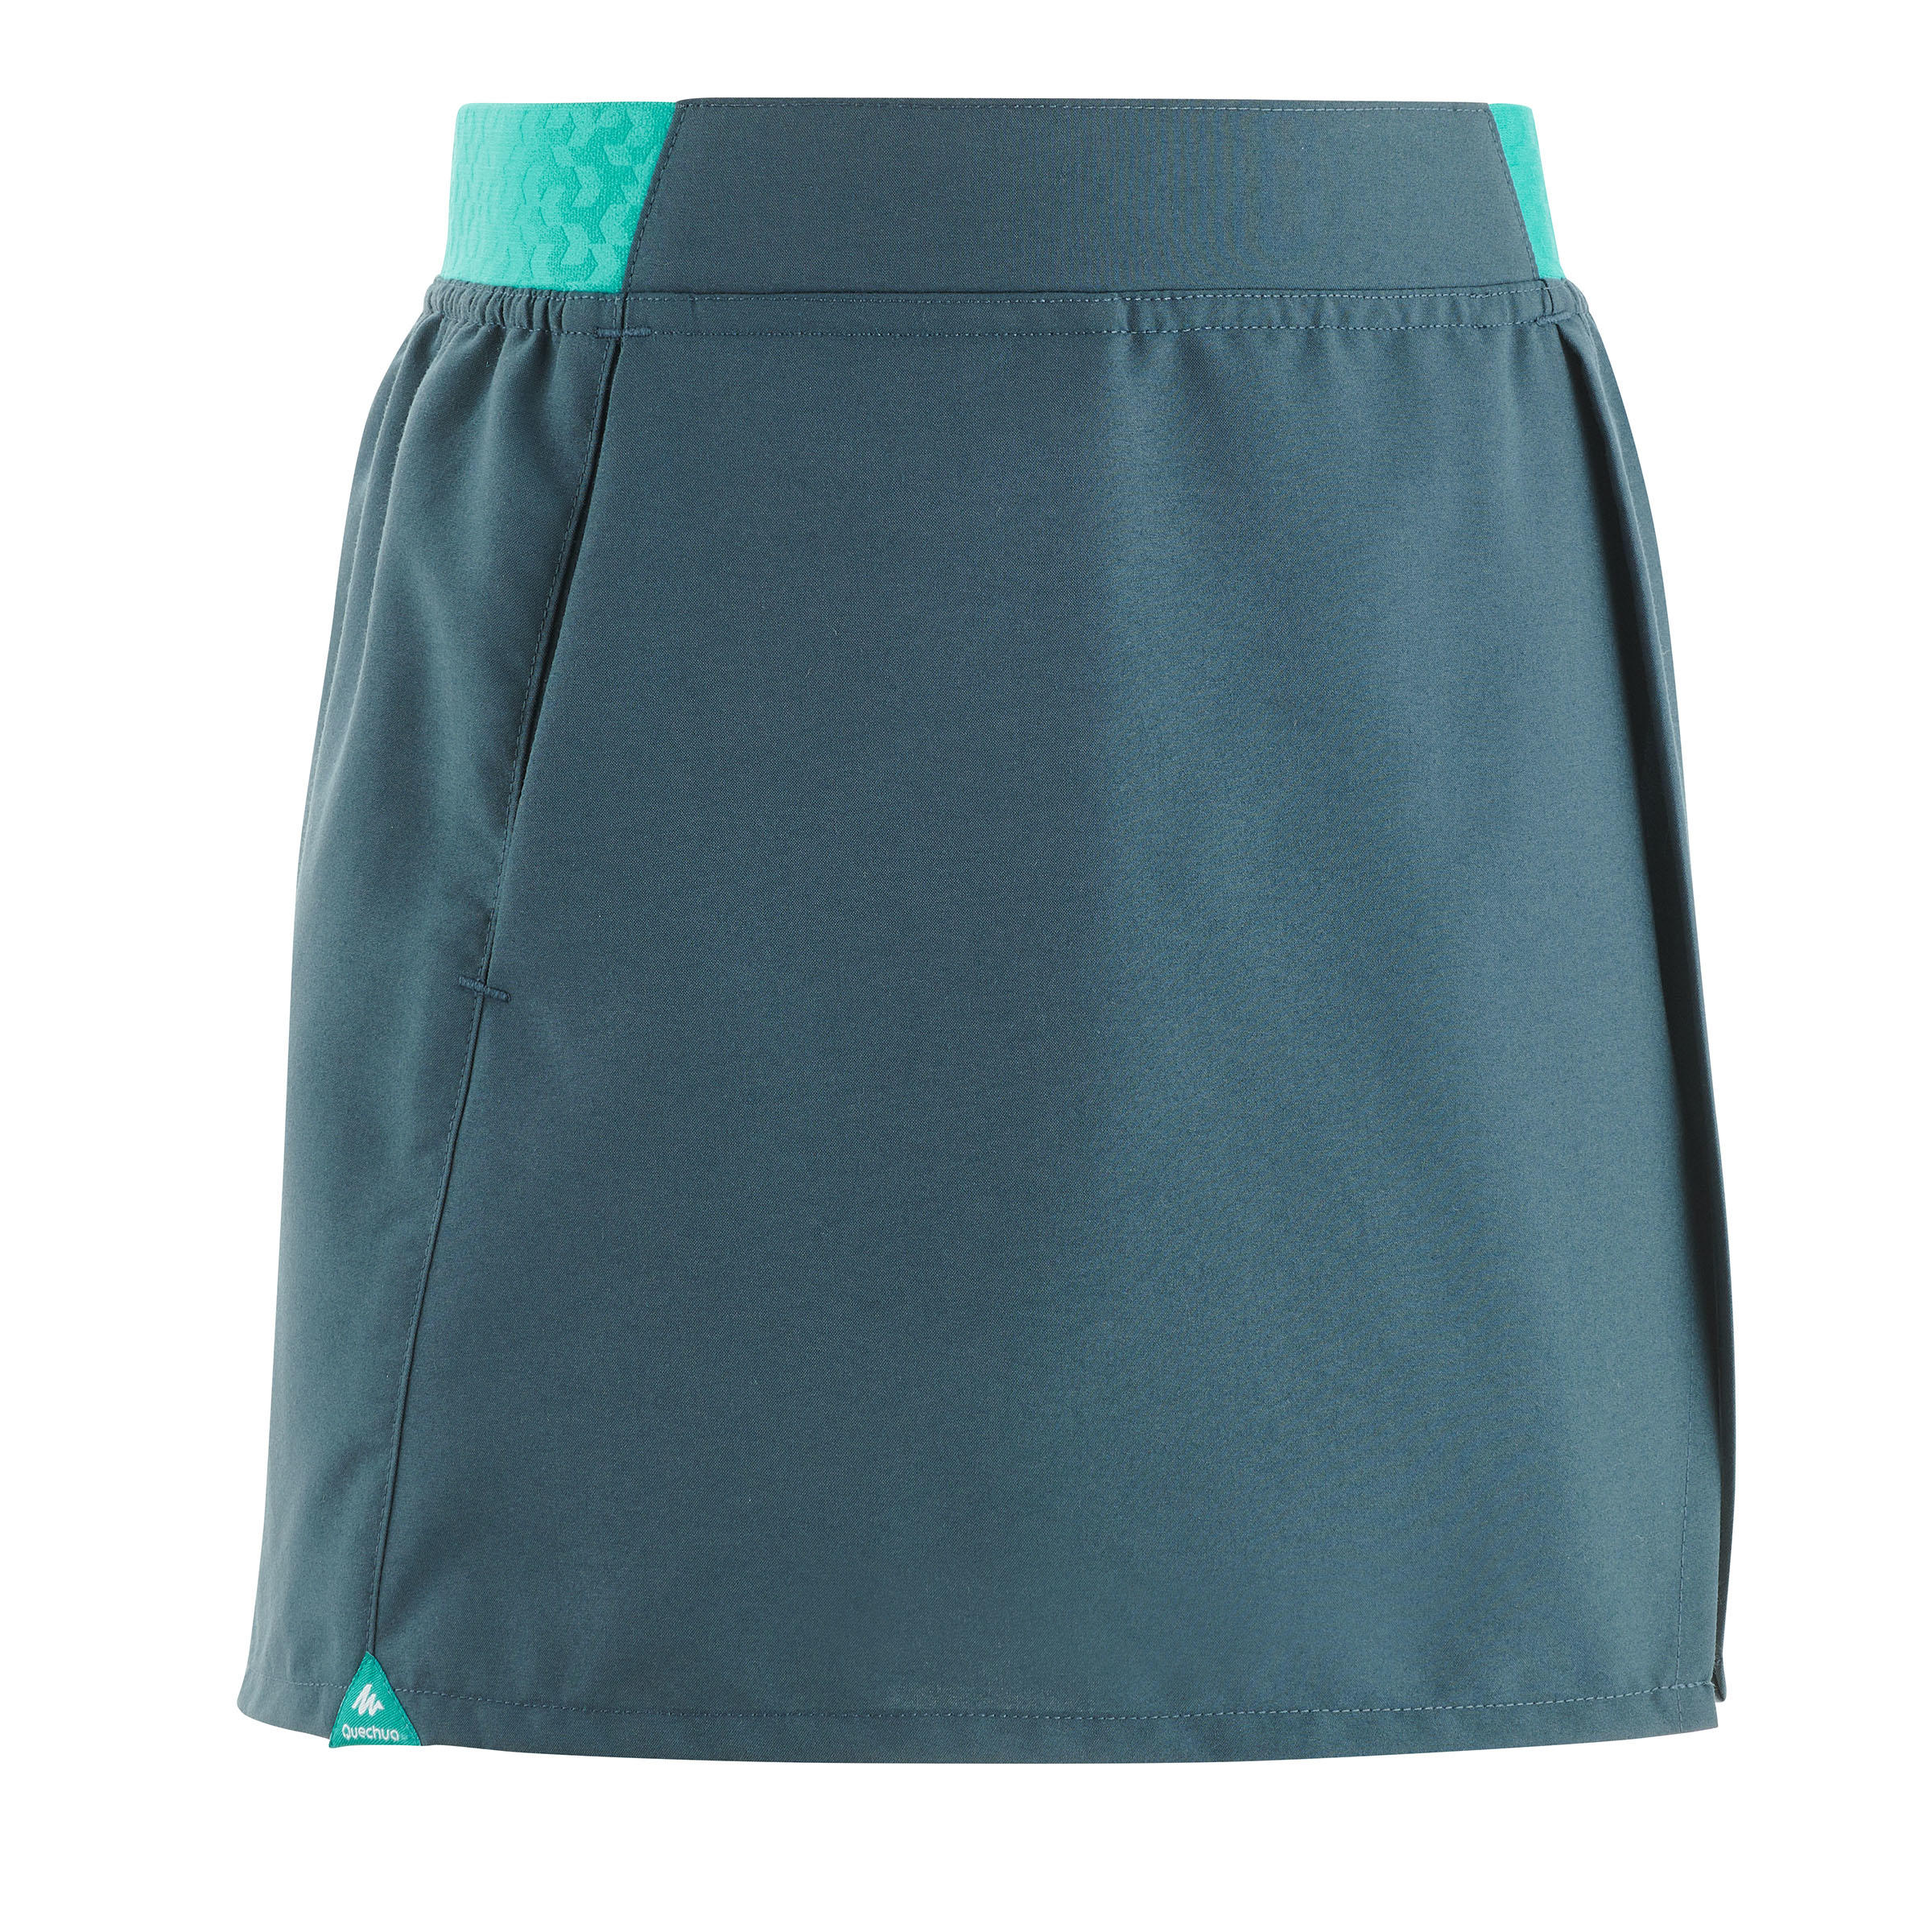 QUECHUA MH100 Children’s Hiking Skorts – Grey and Turquoise for 7 to 15 year olds